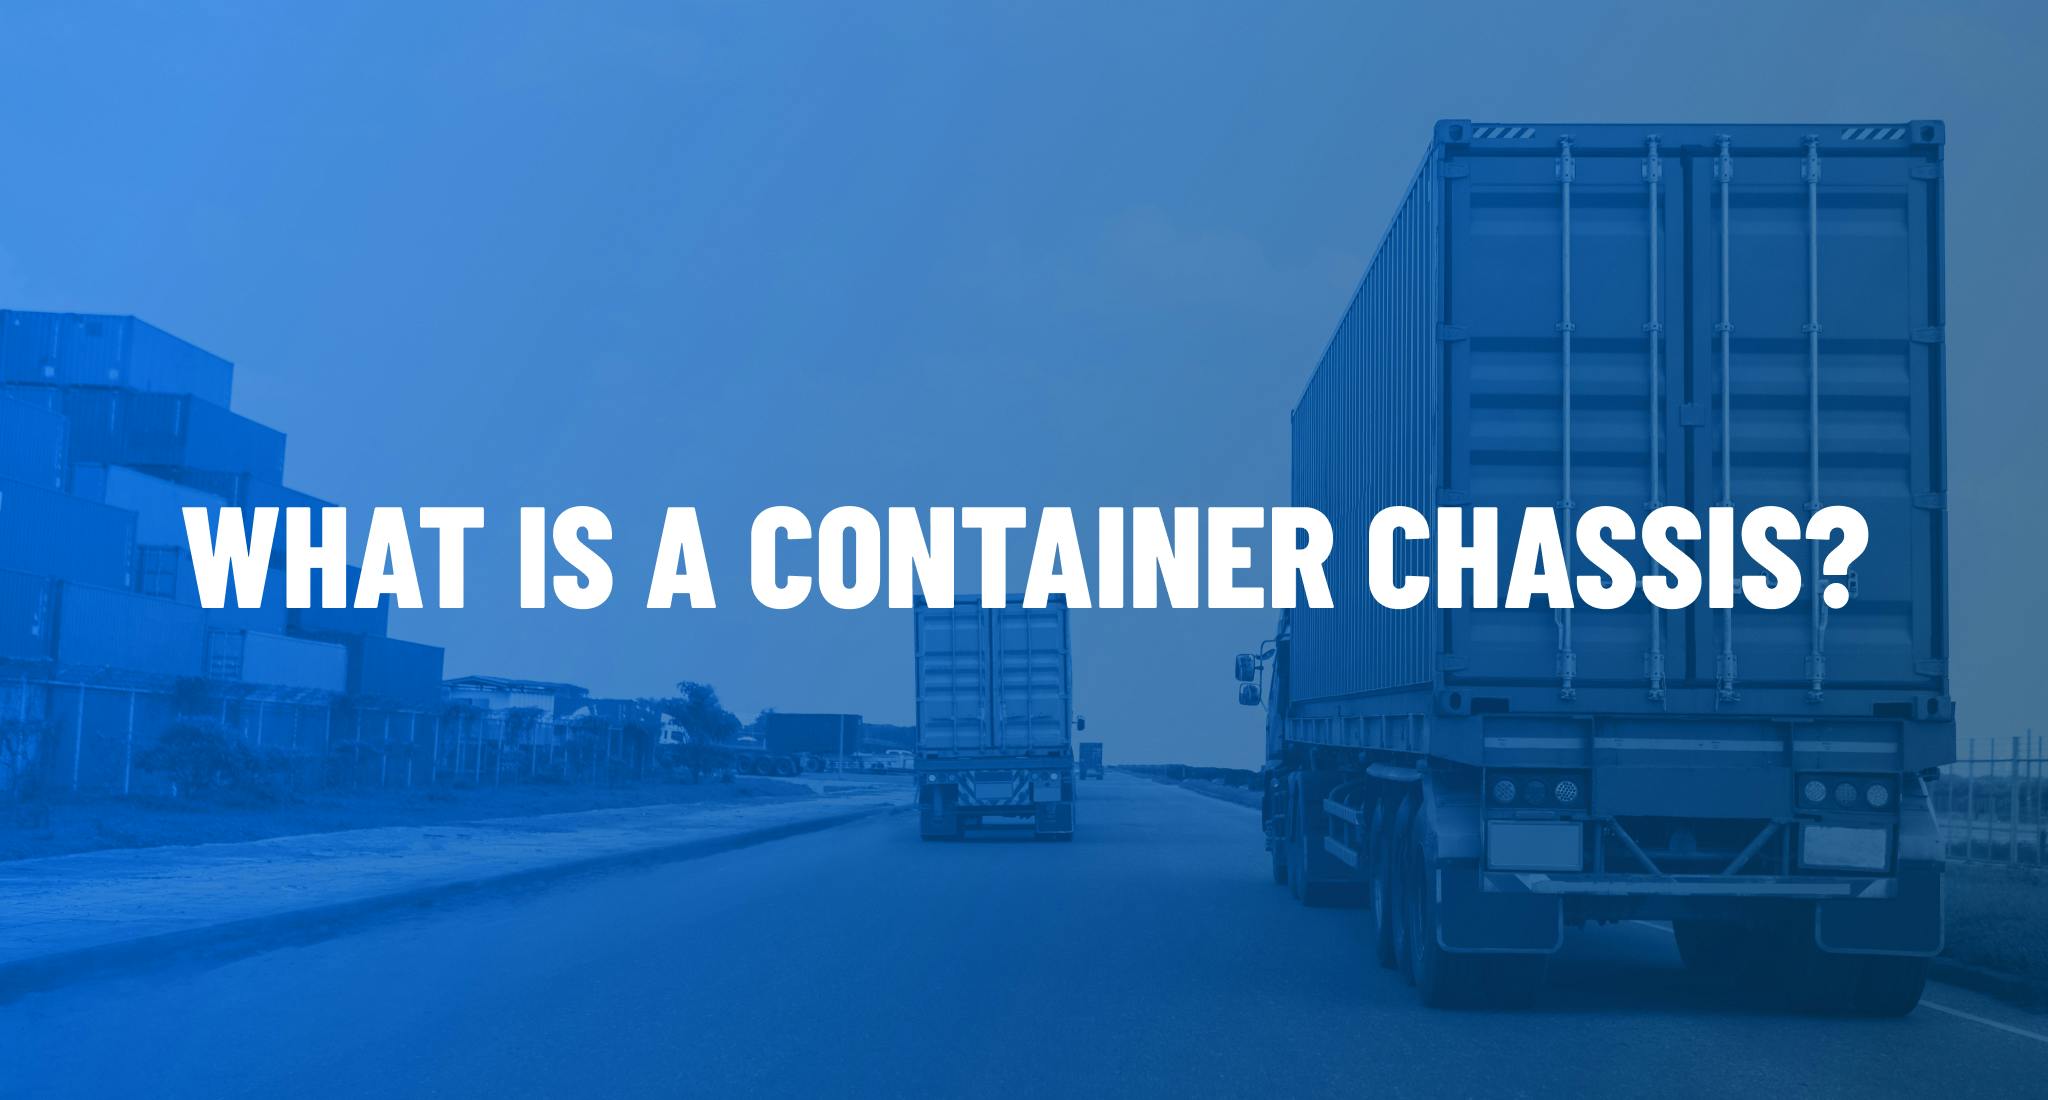 What is a container chassis?